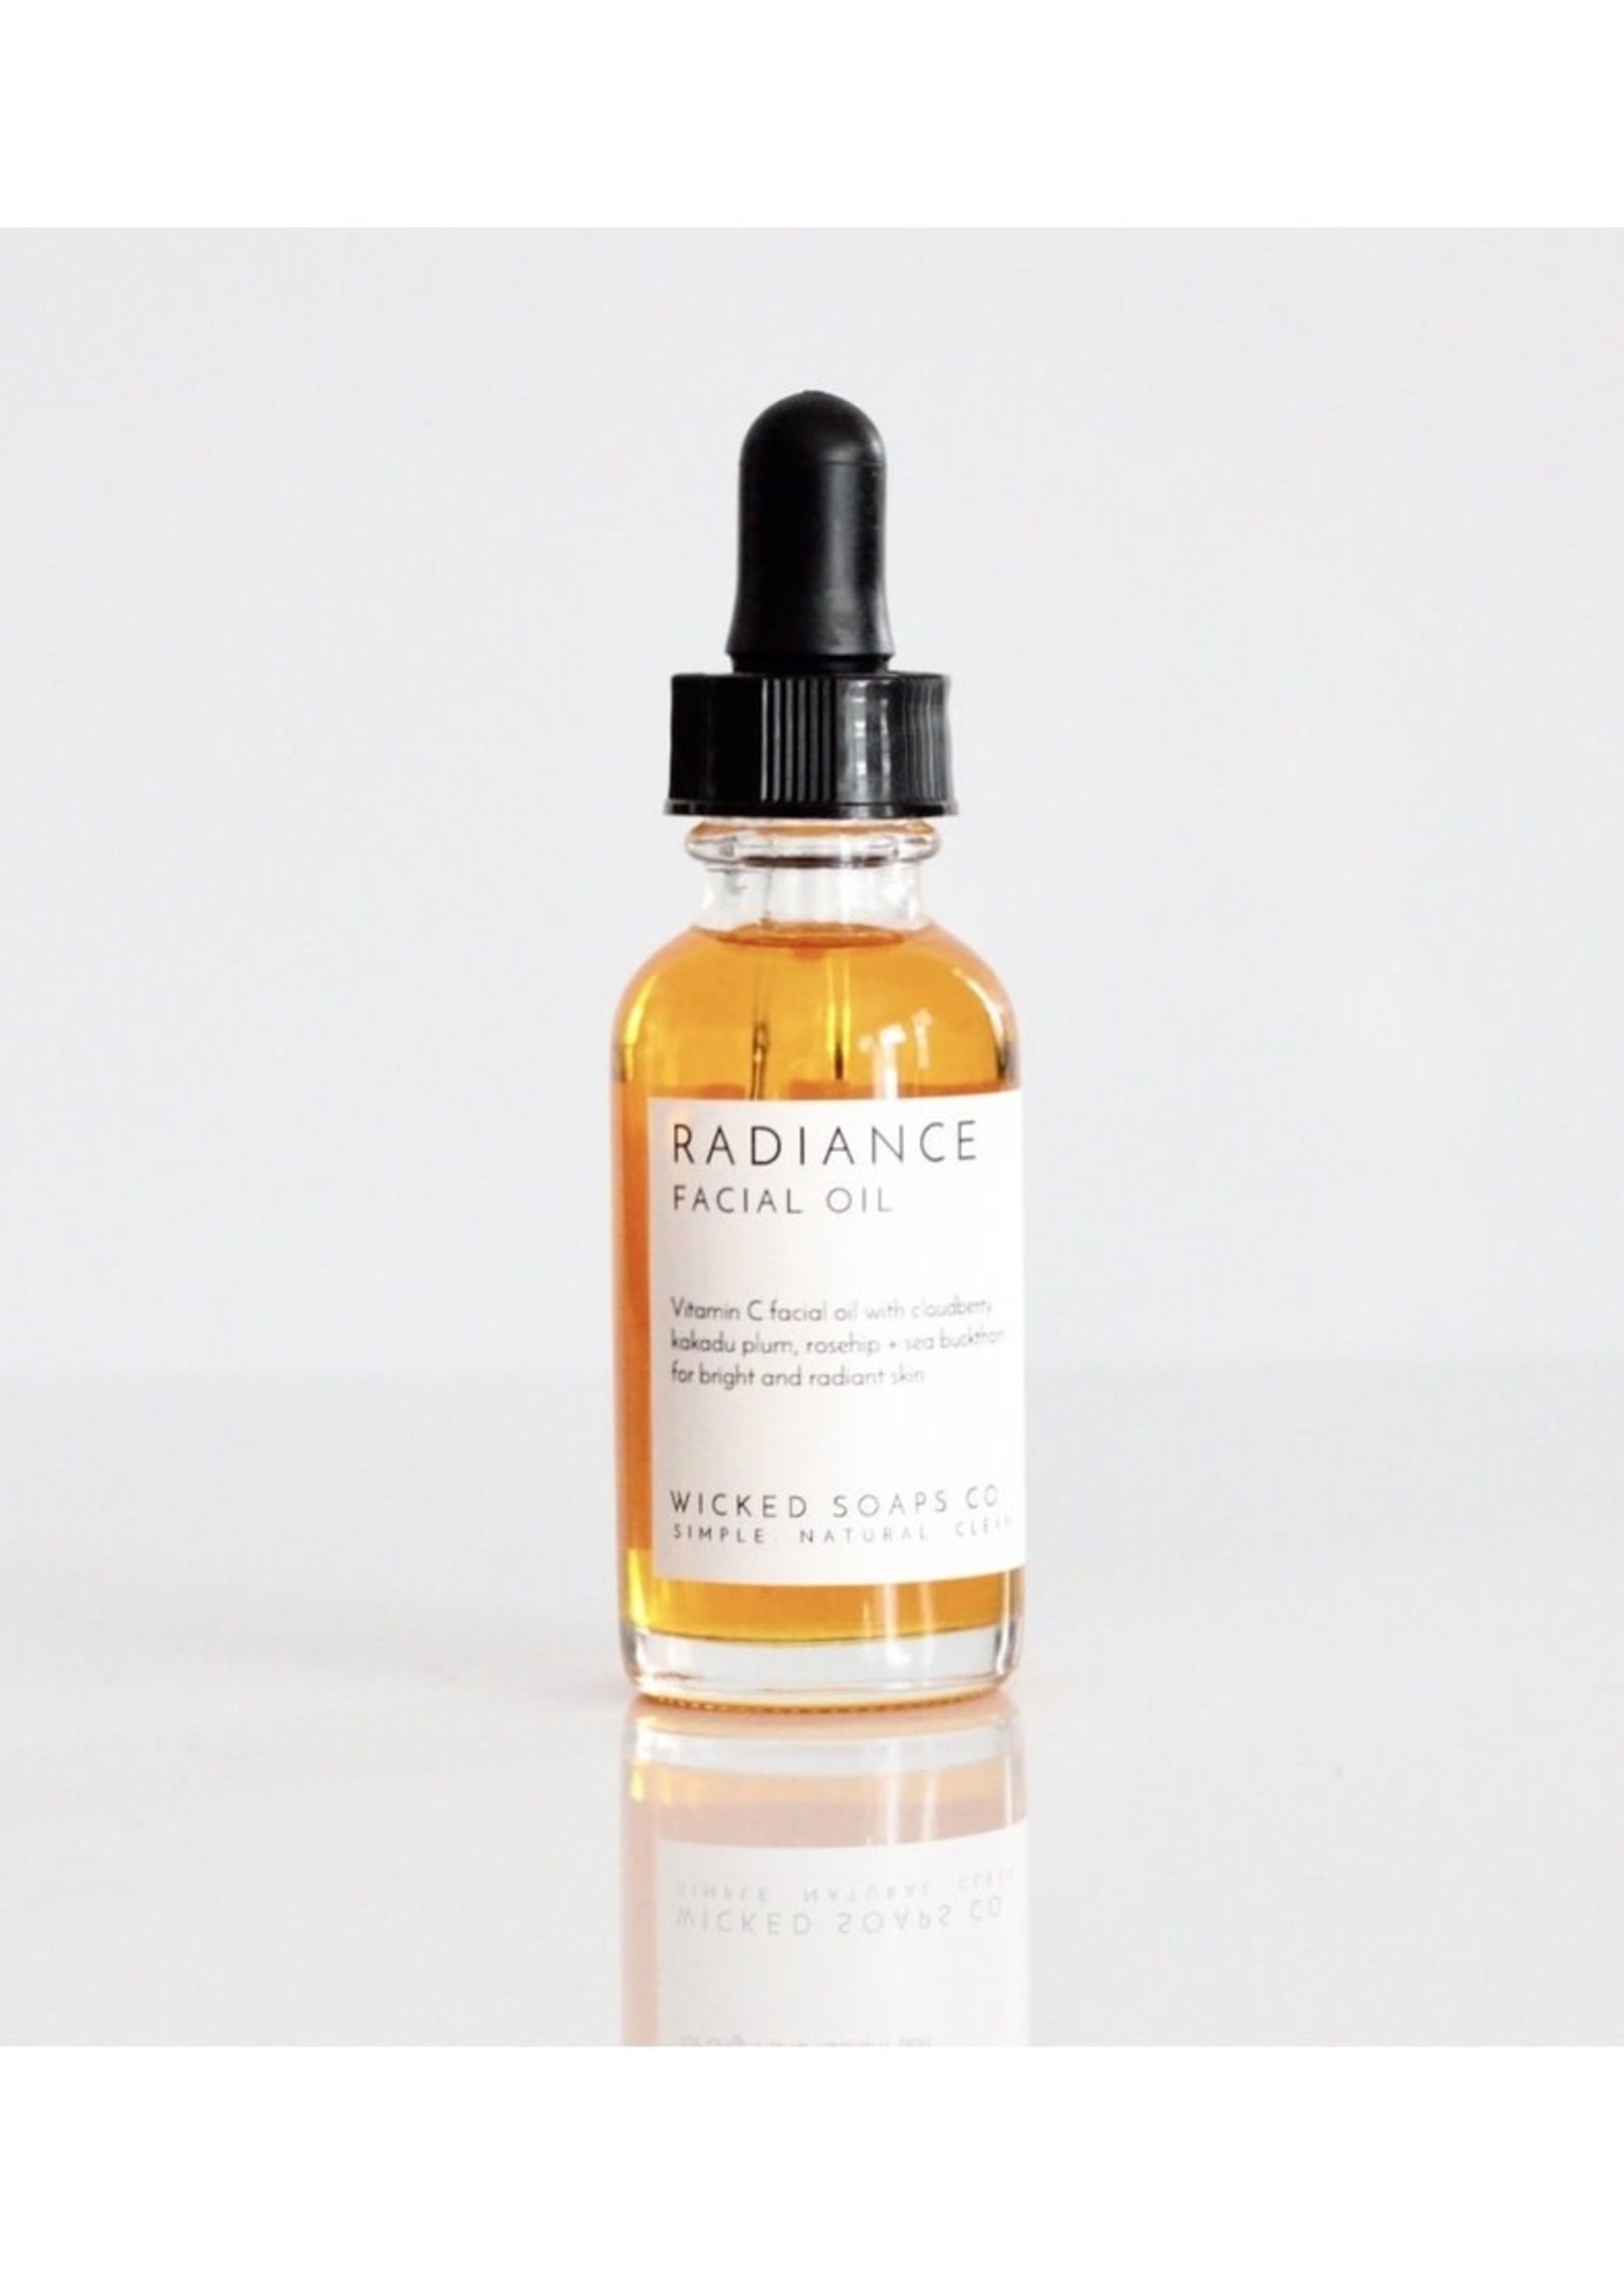 Wicked Soaps Co. Radiance Vitamin C Facial Oil